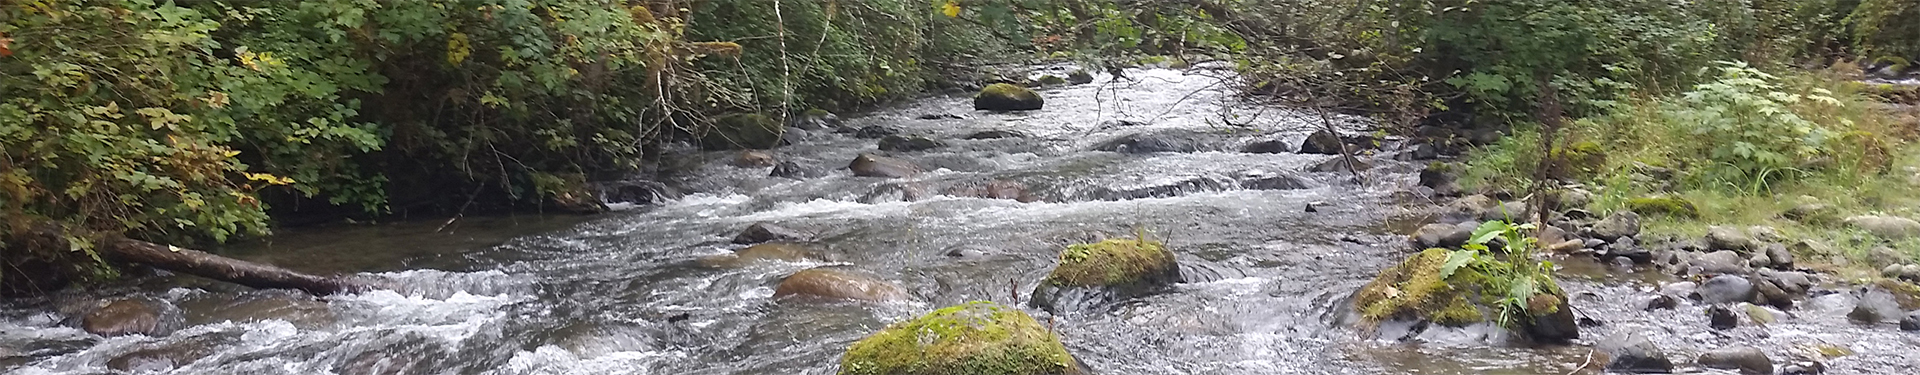 Tulalip Natural Resources Department image of robustly flowing stream